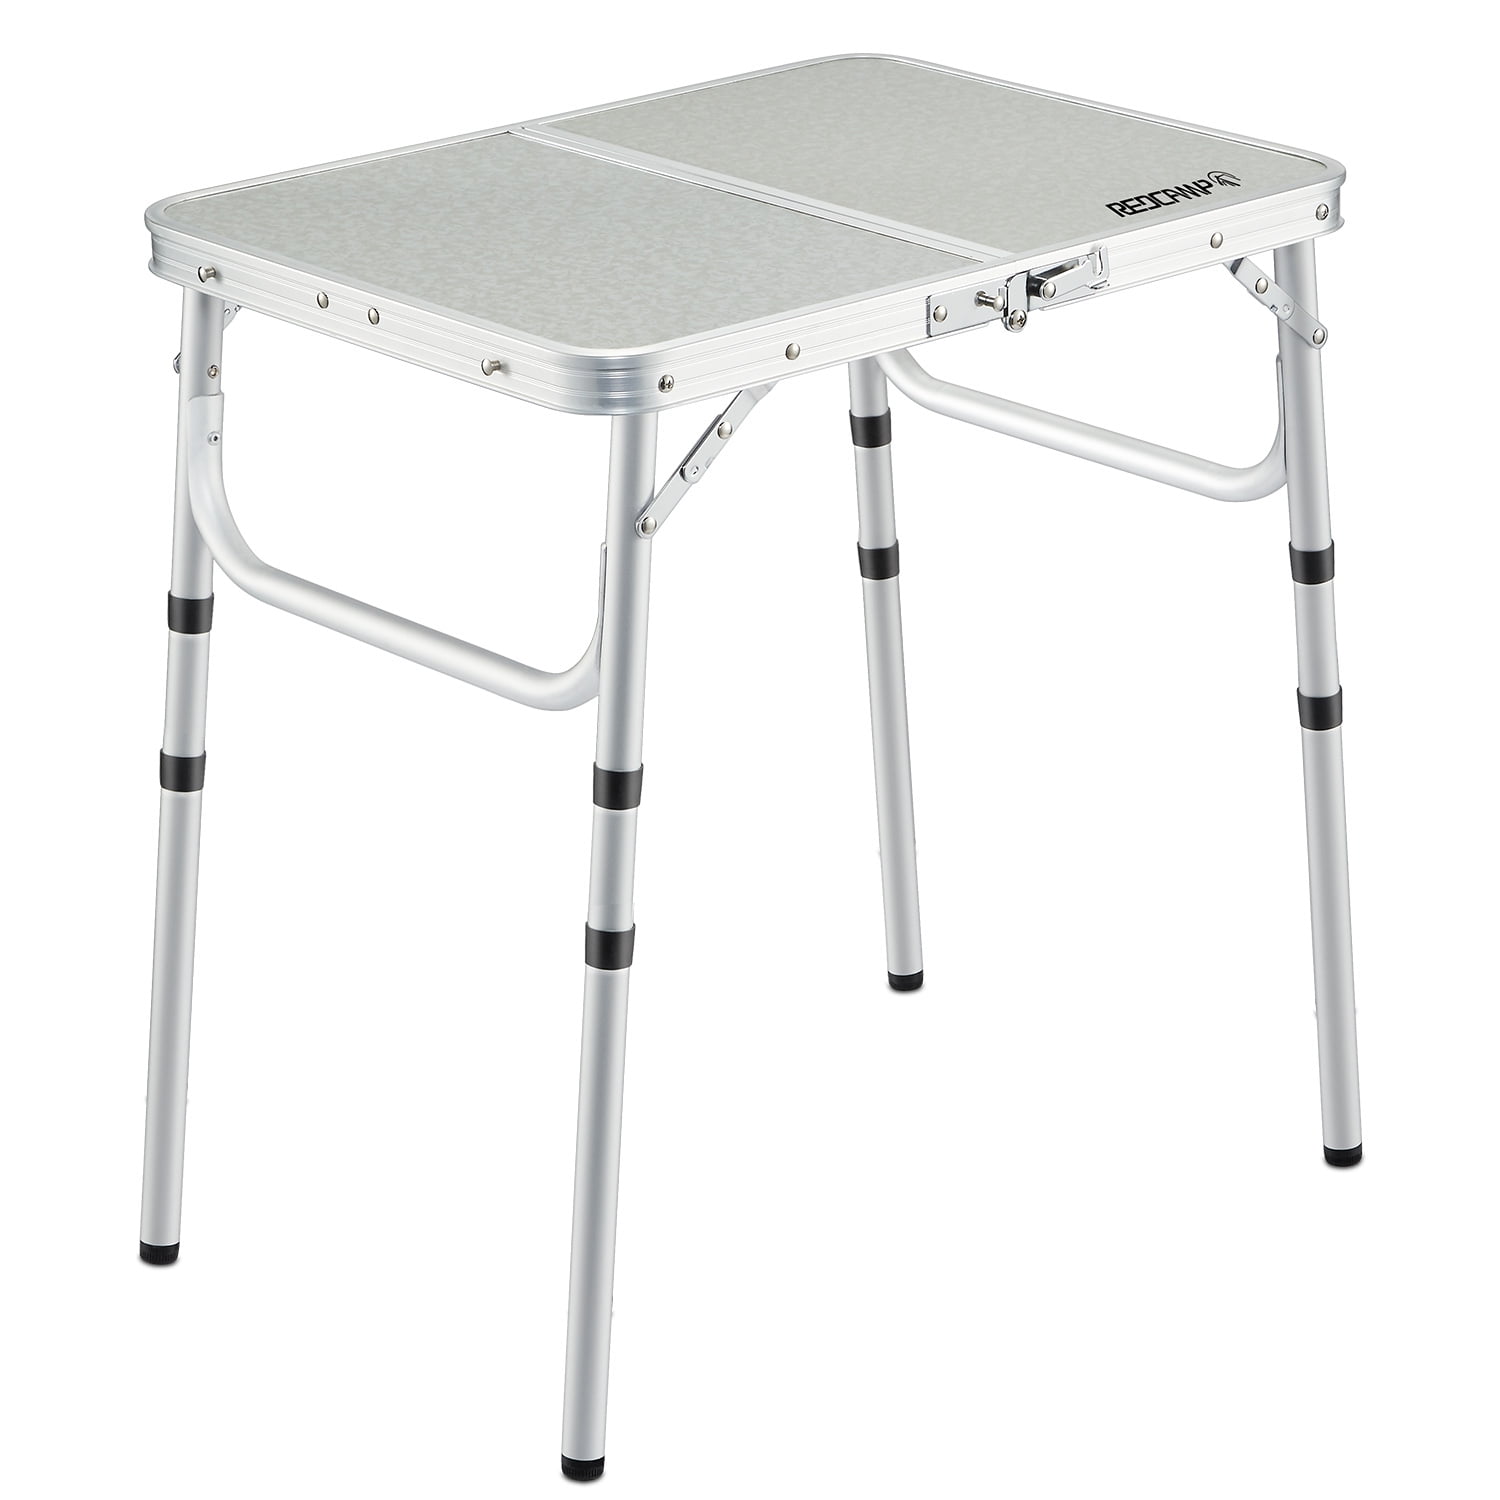 REDCAMP Small Aluminum Folding Table  2 Foot Adjustable 